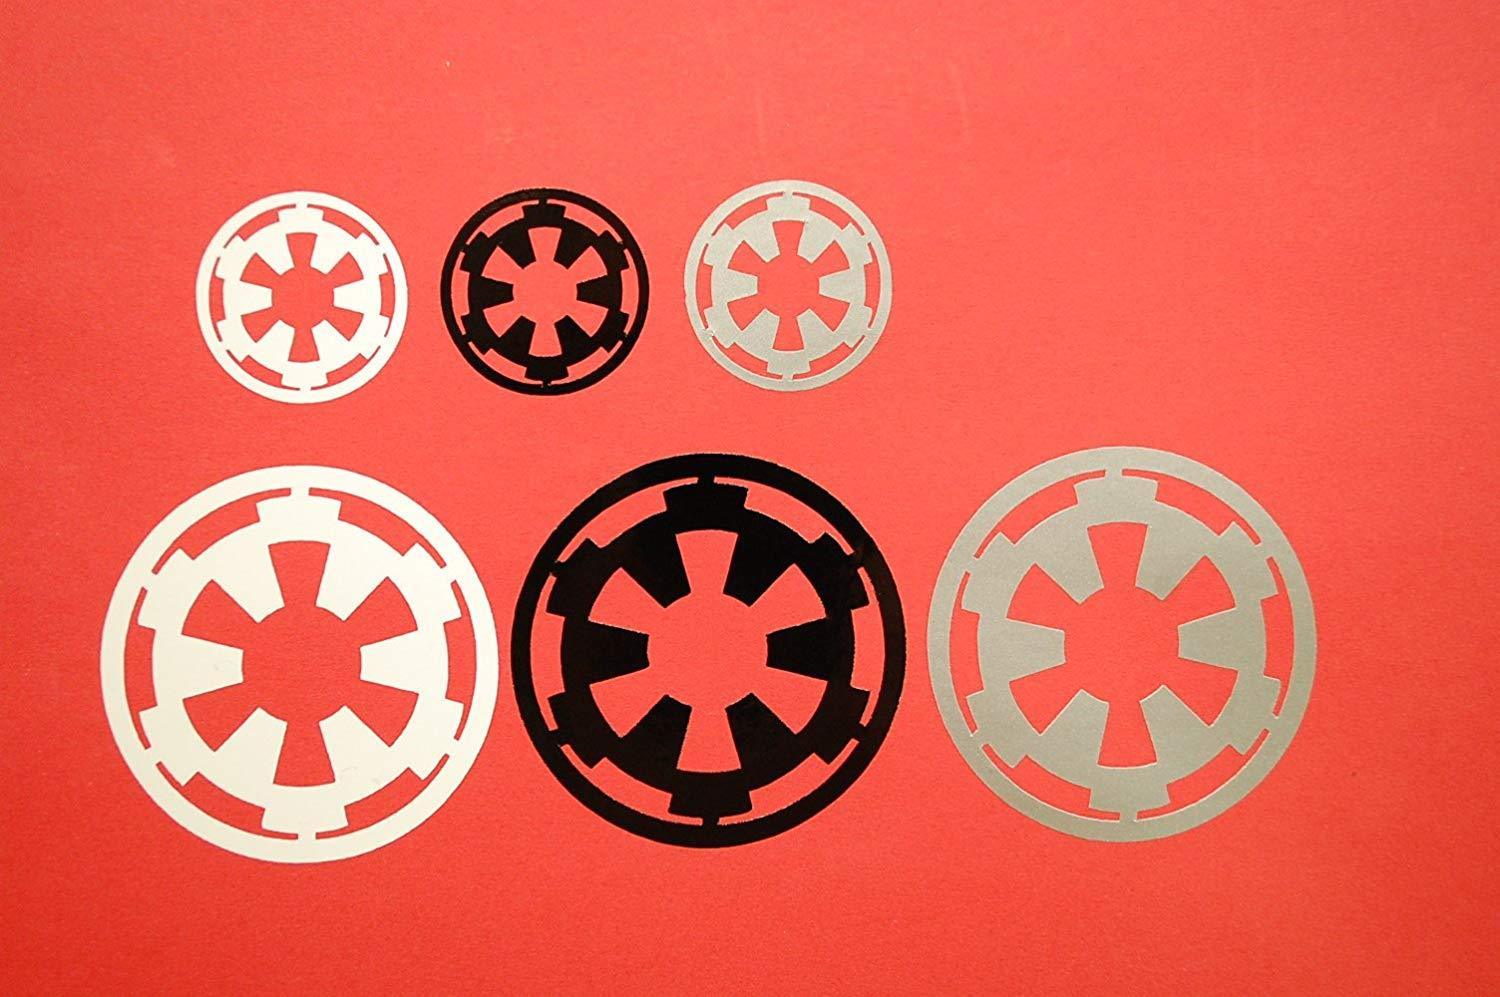 Silver Imperial Logo - Set Of Star Wars Galactic Empire Imperial Logo Sticker Vinyl Decals